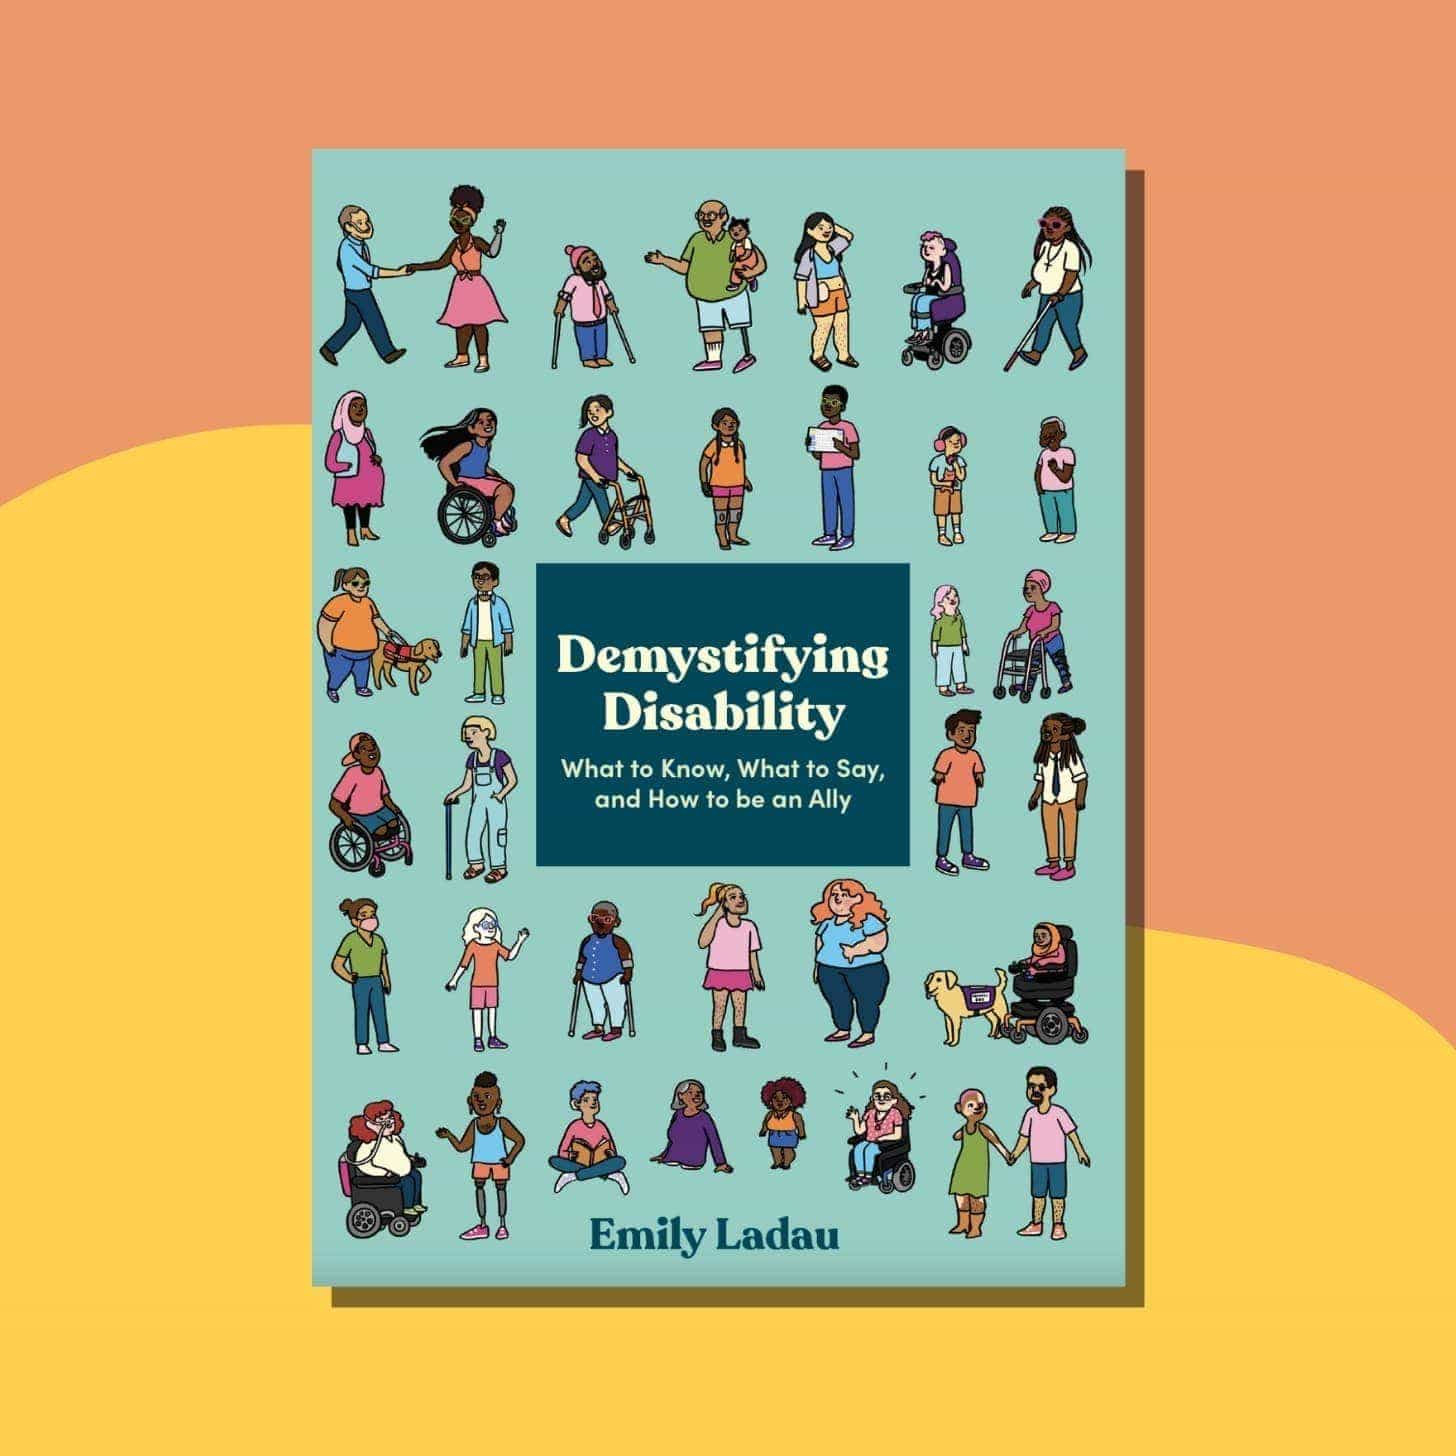 “Demystifying Disability: What to Know, What to Say, and How to Be an Ally” by Emily Ladau — Book cover has more than 40 diverse people illustrated